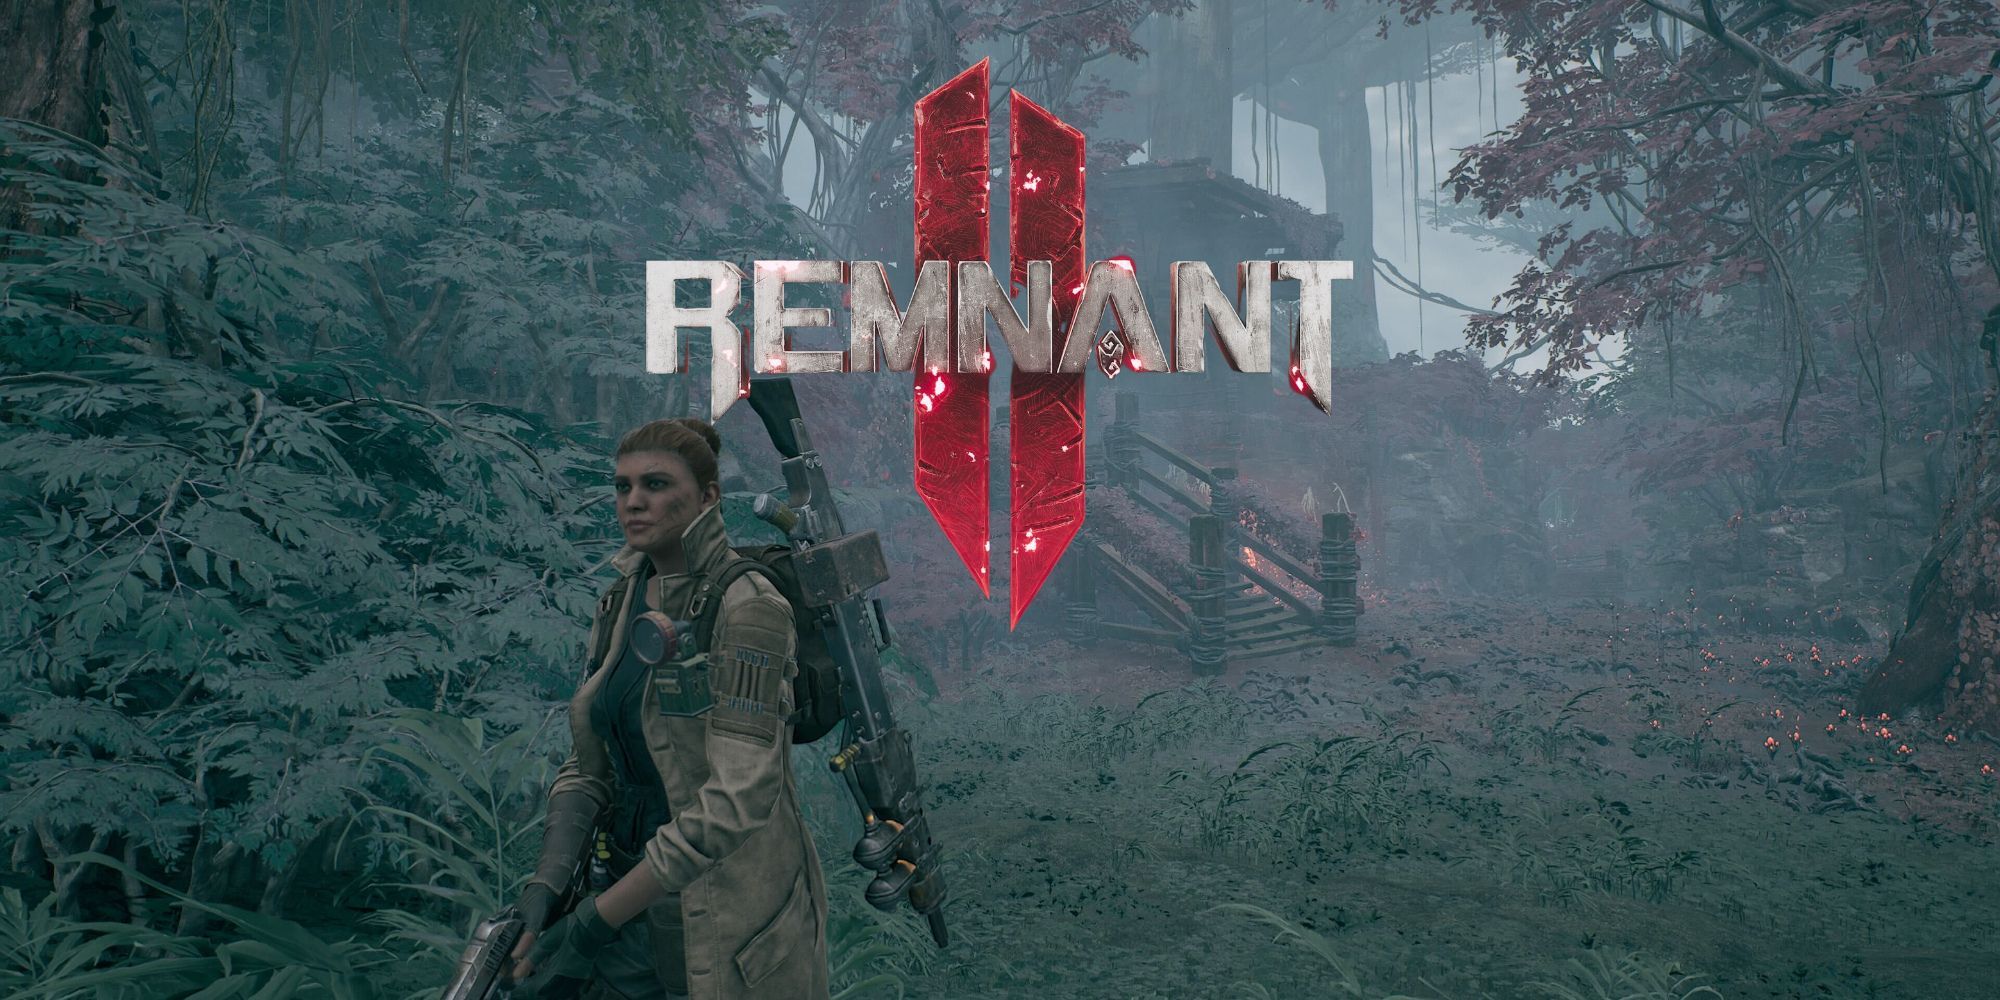 A player in-game in Remnant 2's Hardcore Mode